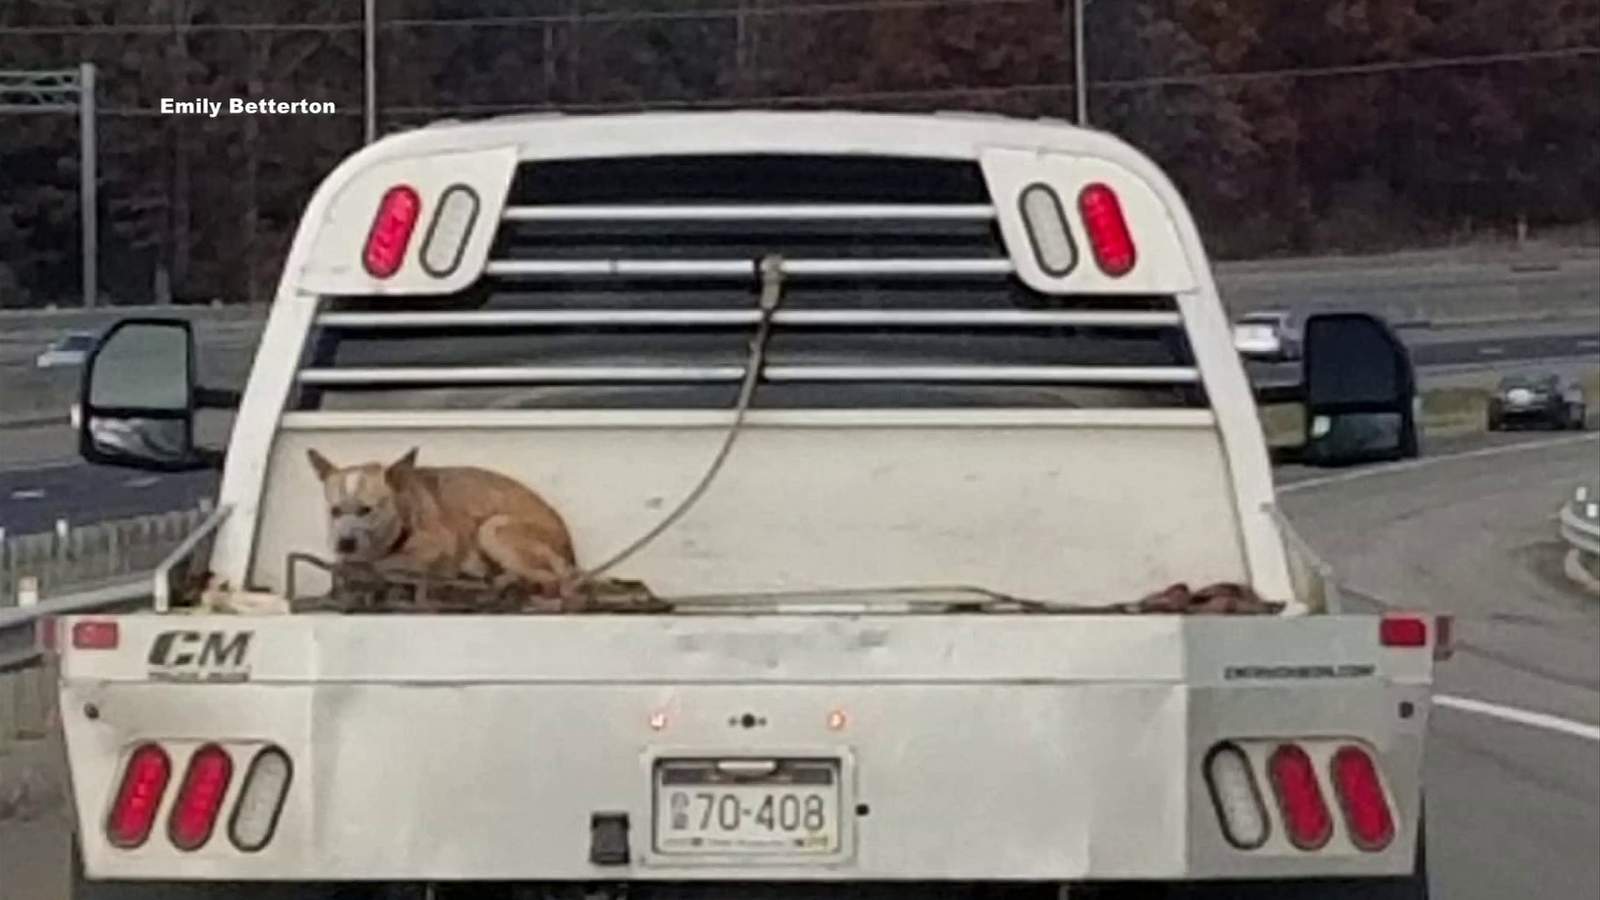 ’That’s not okay with us’: Photo of dog riding on truck on I-81 goes viral